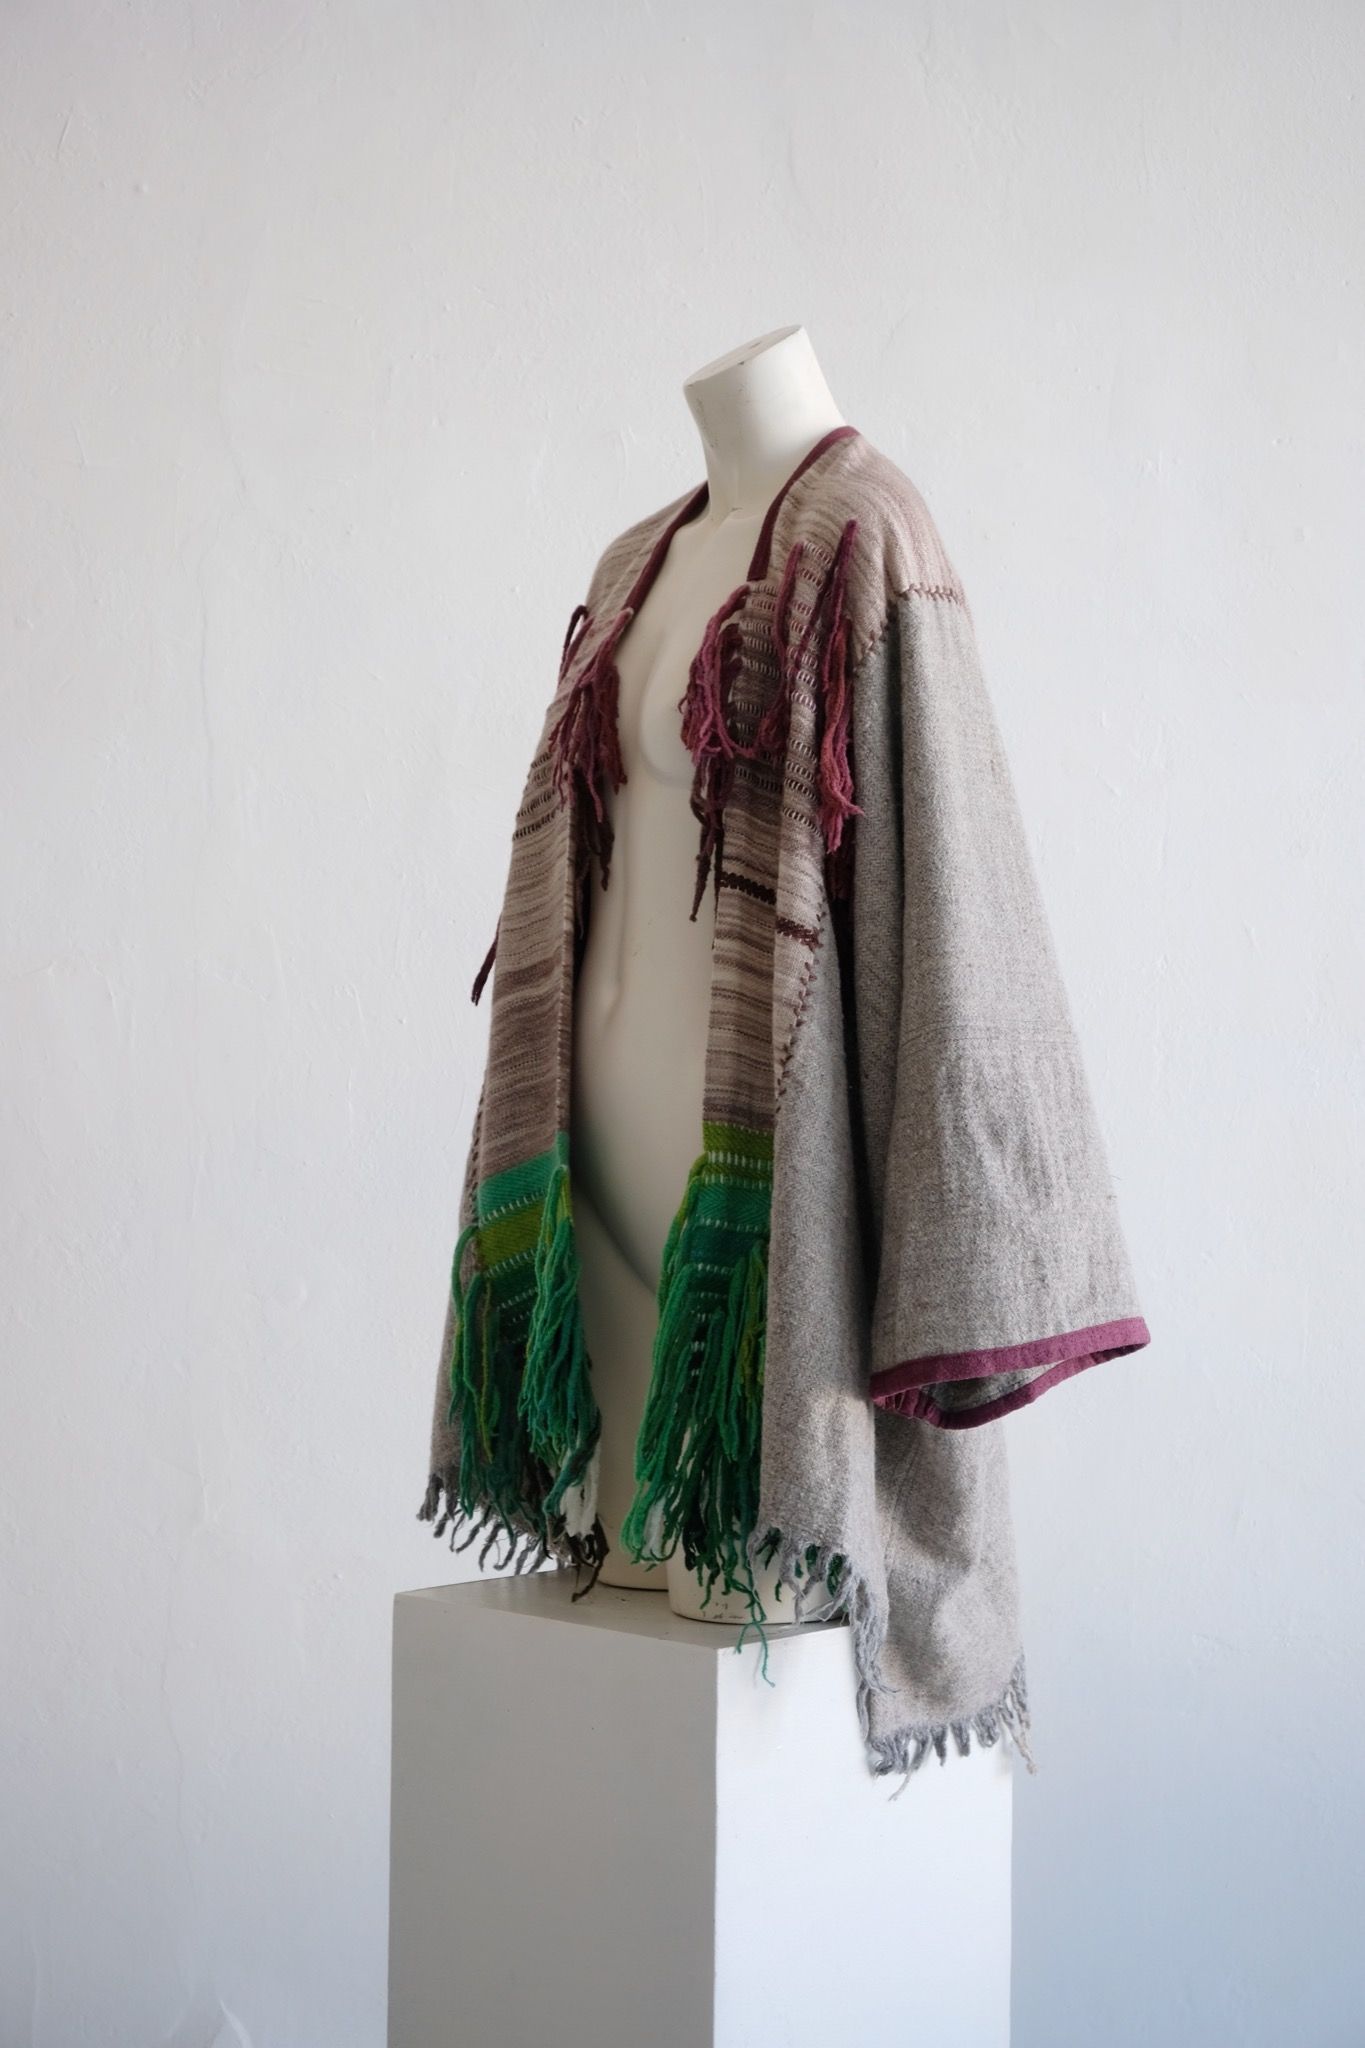 Handwoven, highly textured with fringe cloak that is grey, brown, green and rainbow on a white mannequin against a white wall